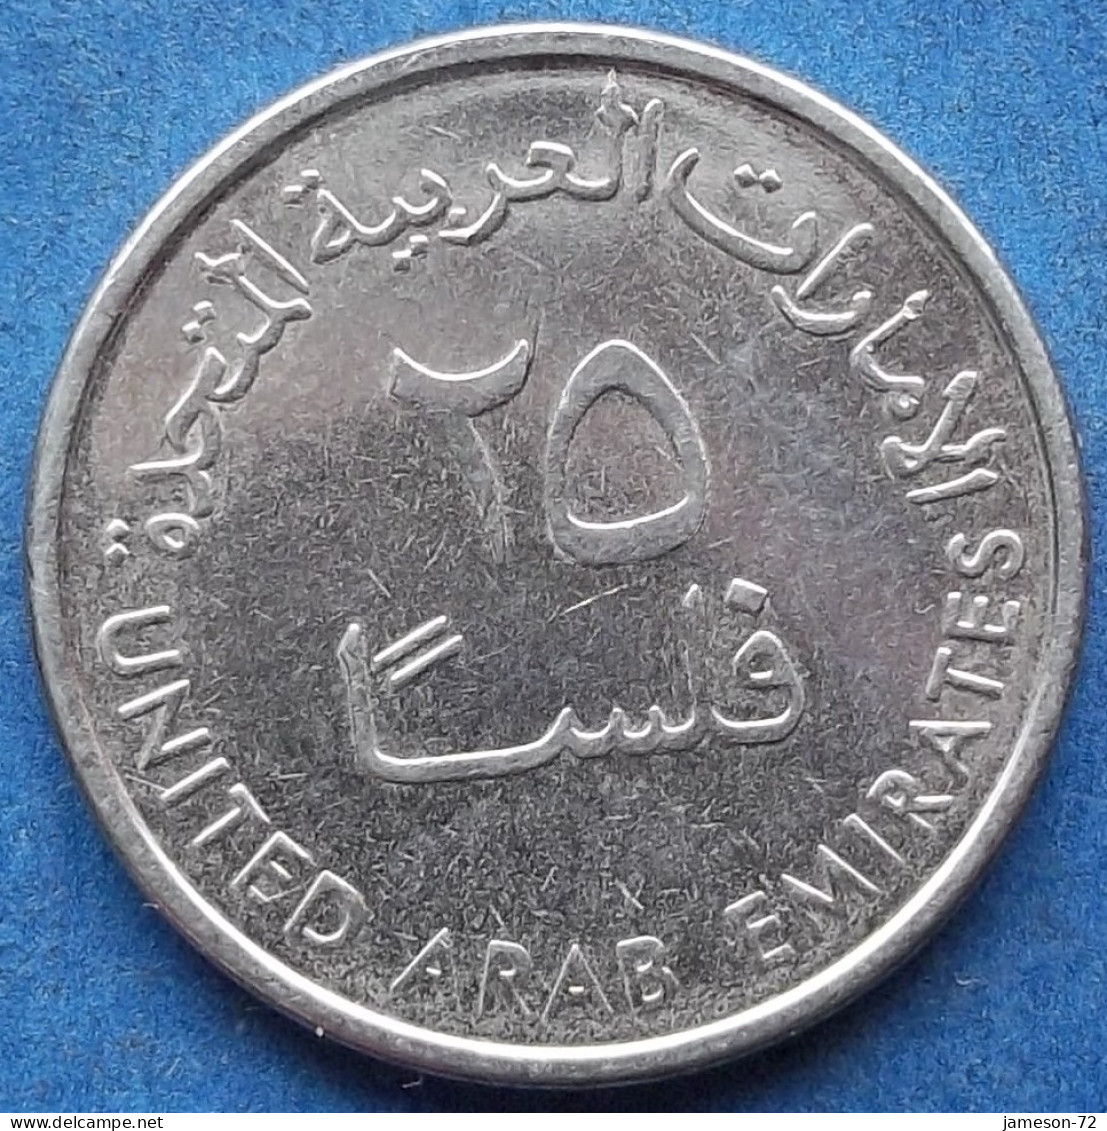 UNITED ARAB EMIRATES - 25 Fils AH1443 / 2022AD "Gazelle" KM# 4a Independent (1971) - Edelweiss Coins - Ver. Arab. Emirate